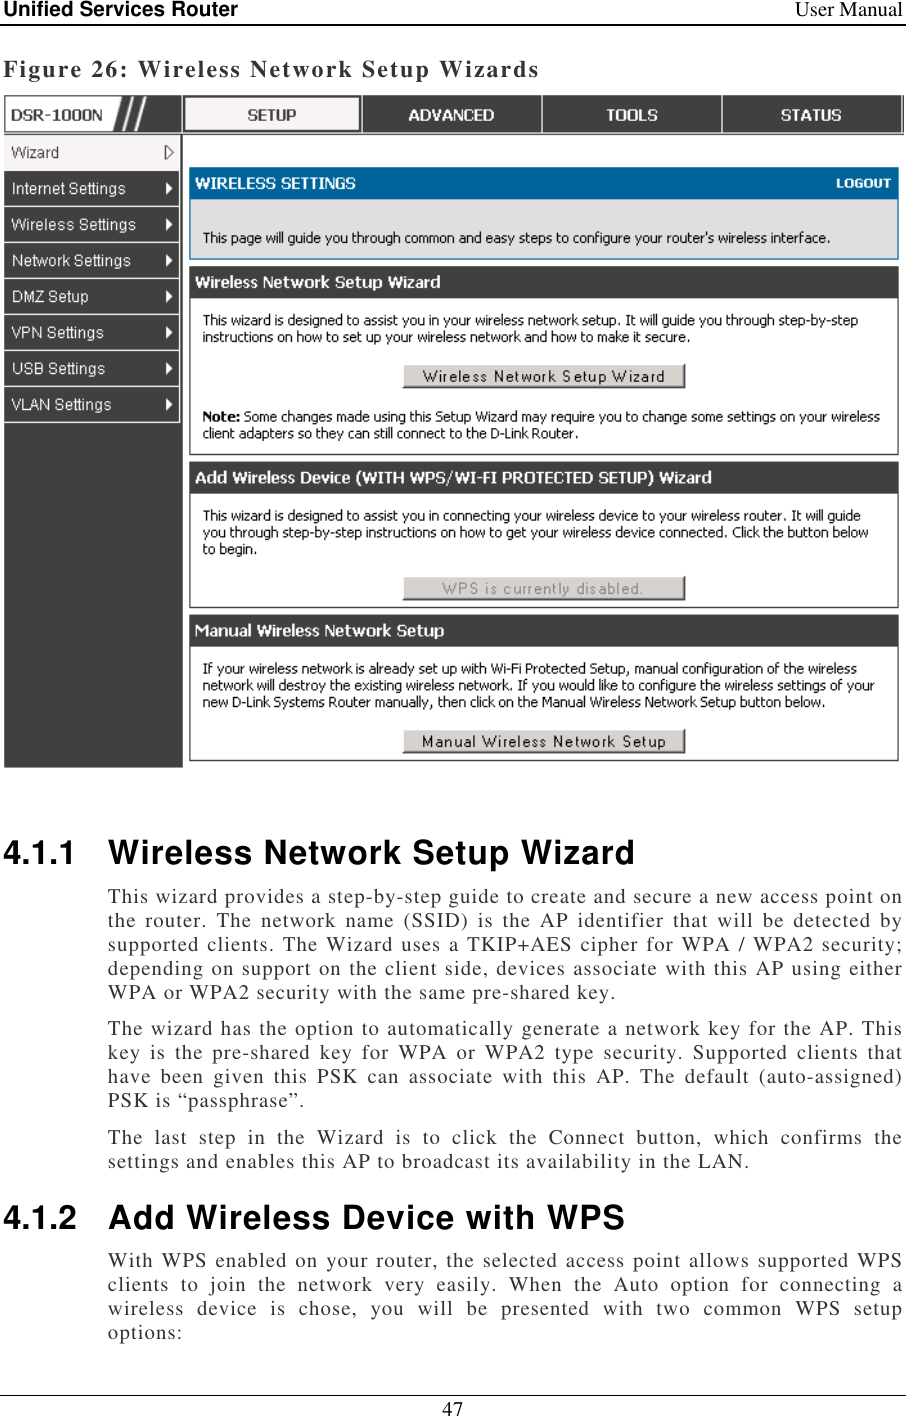 Unified Services Router    User Manual 47  Figure 26: Wireless Network Setup Wizards   4.1.1  Wireless Network Setup Wizard This wizard provides a step-by-step guide to create and secure a new access point on the  router.  The  network  name  (SSID)  is  the  AP  identifier  that  will  be  detected  by supported clients. The Wizard uses a TKIP+AES cipher for WPA / WPA2 security; depending on support on the client side, devices associate with this AP using either WPA or WPA2 security with the same pre-shared key. The wizard has the option to automatically generate a network key for the AP. This key  is  the  pre-shared  key  for  WPA  or  WPA2  type  security.  Supported  clients  that have  been  given  this  PSK  can  associate  with  this  AP.  The  default  (auto-assigned) PSK is “passphrase”.  The  last  step  in  the  Wizard  is  to  click  the  Connect  button,  which  confirms  the settings and enables this AP to broadcast its availability in the LAN.  4.1.2  Add Wireless Device with WPS With WPS enabled on your router, the selected access point allows supported WPS clients  to  join  the  network  very  easily.  When  the  Auto  option  for  connecting  a wireless  device  is  chose,  you  will  be  presented  with  two  common  WPS  setup options: 